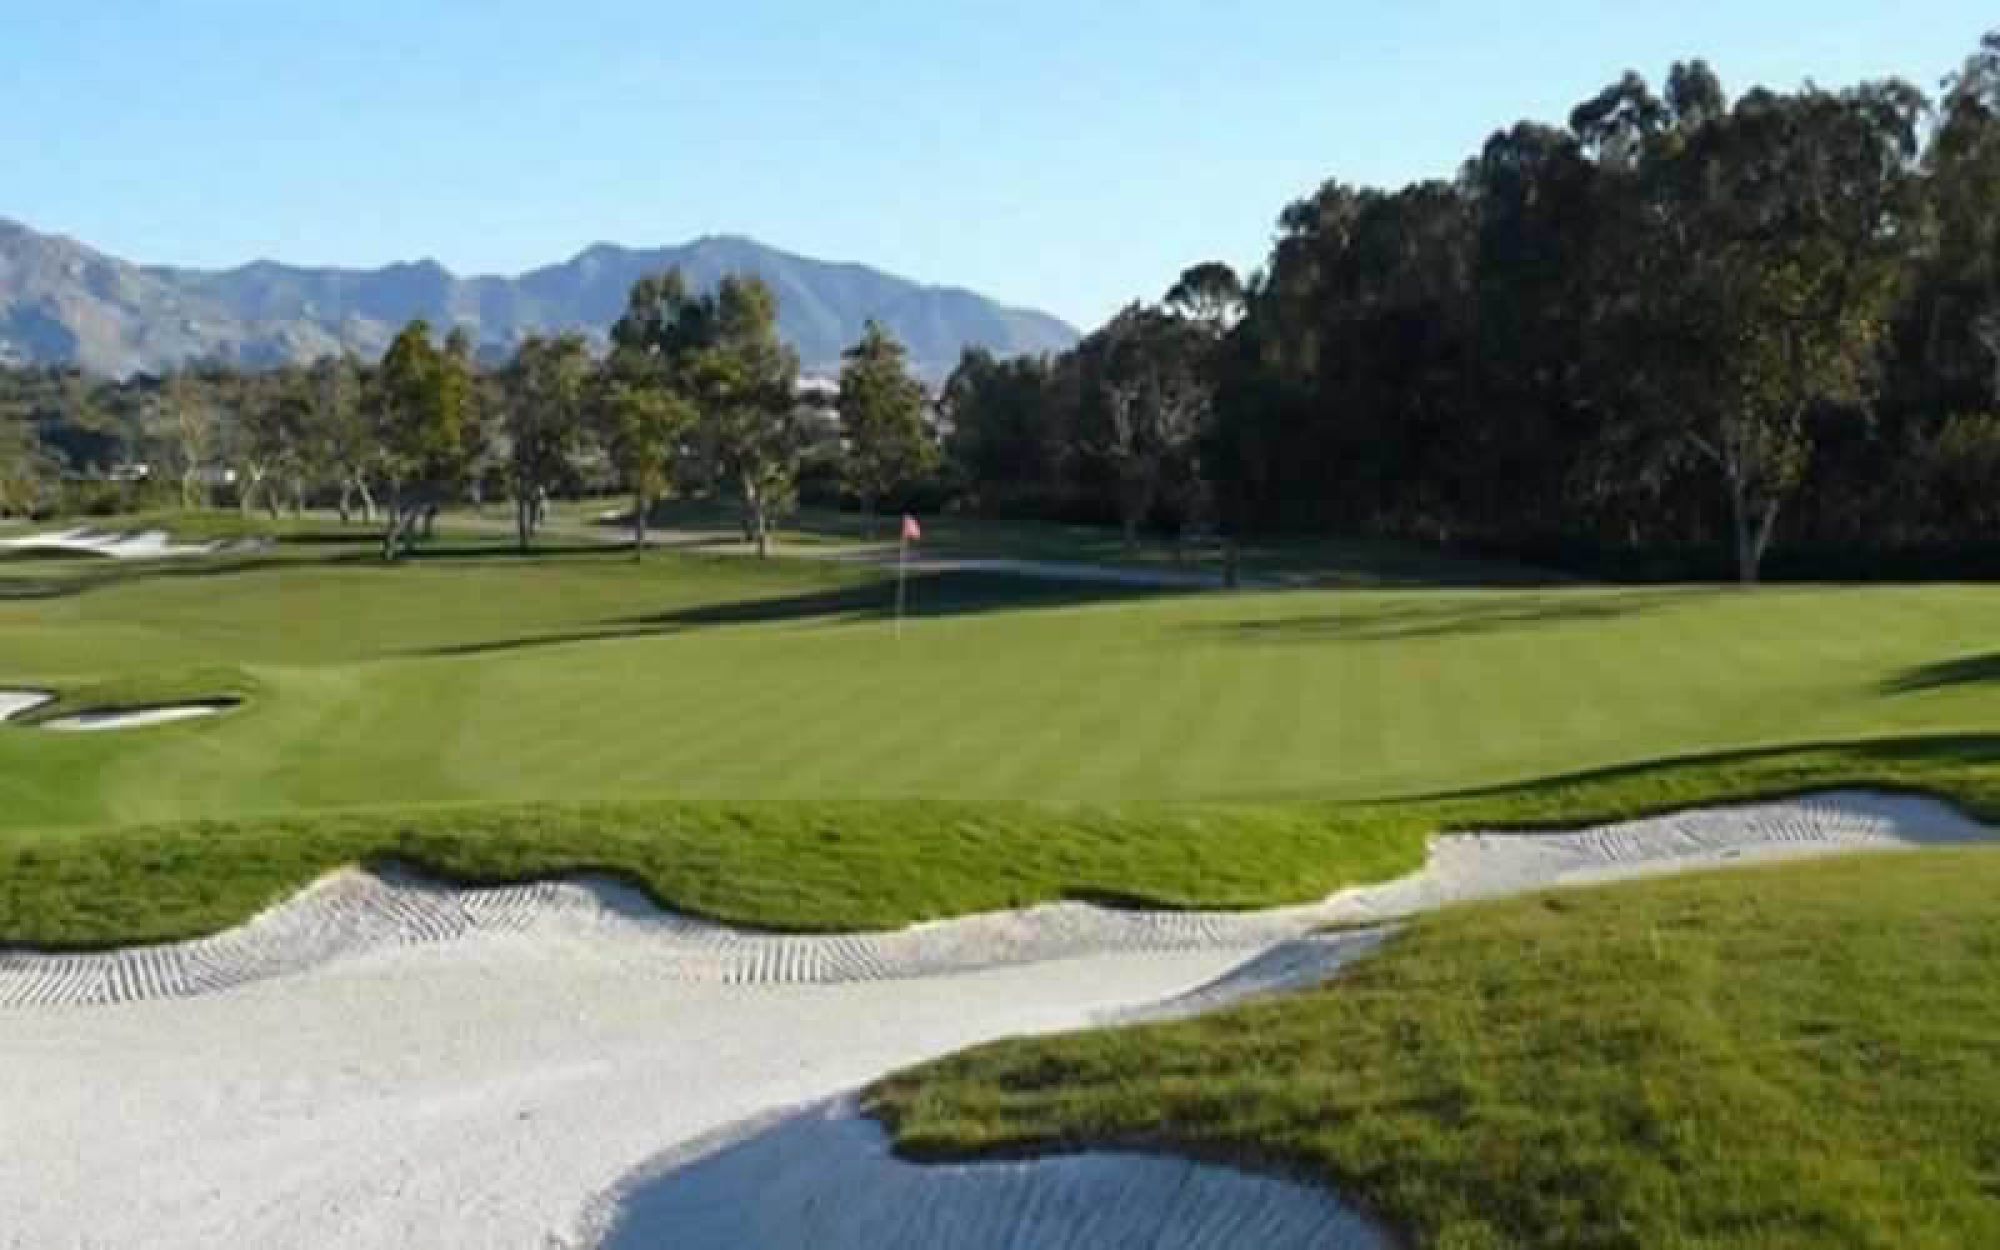 All The Santana Golf Club's lovely golf course in pleasing Costa Del Sol.